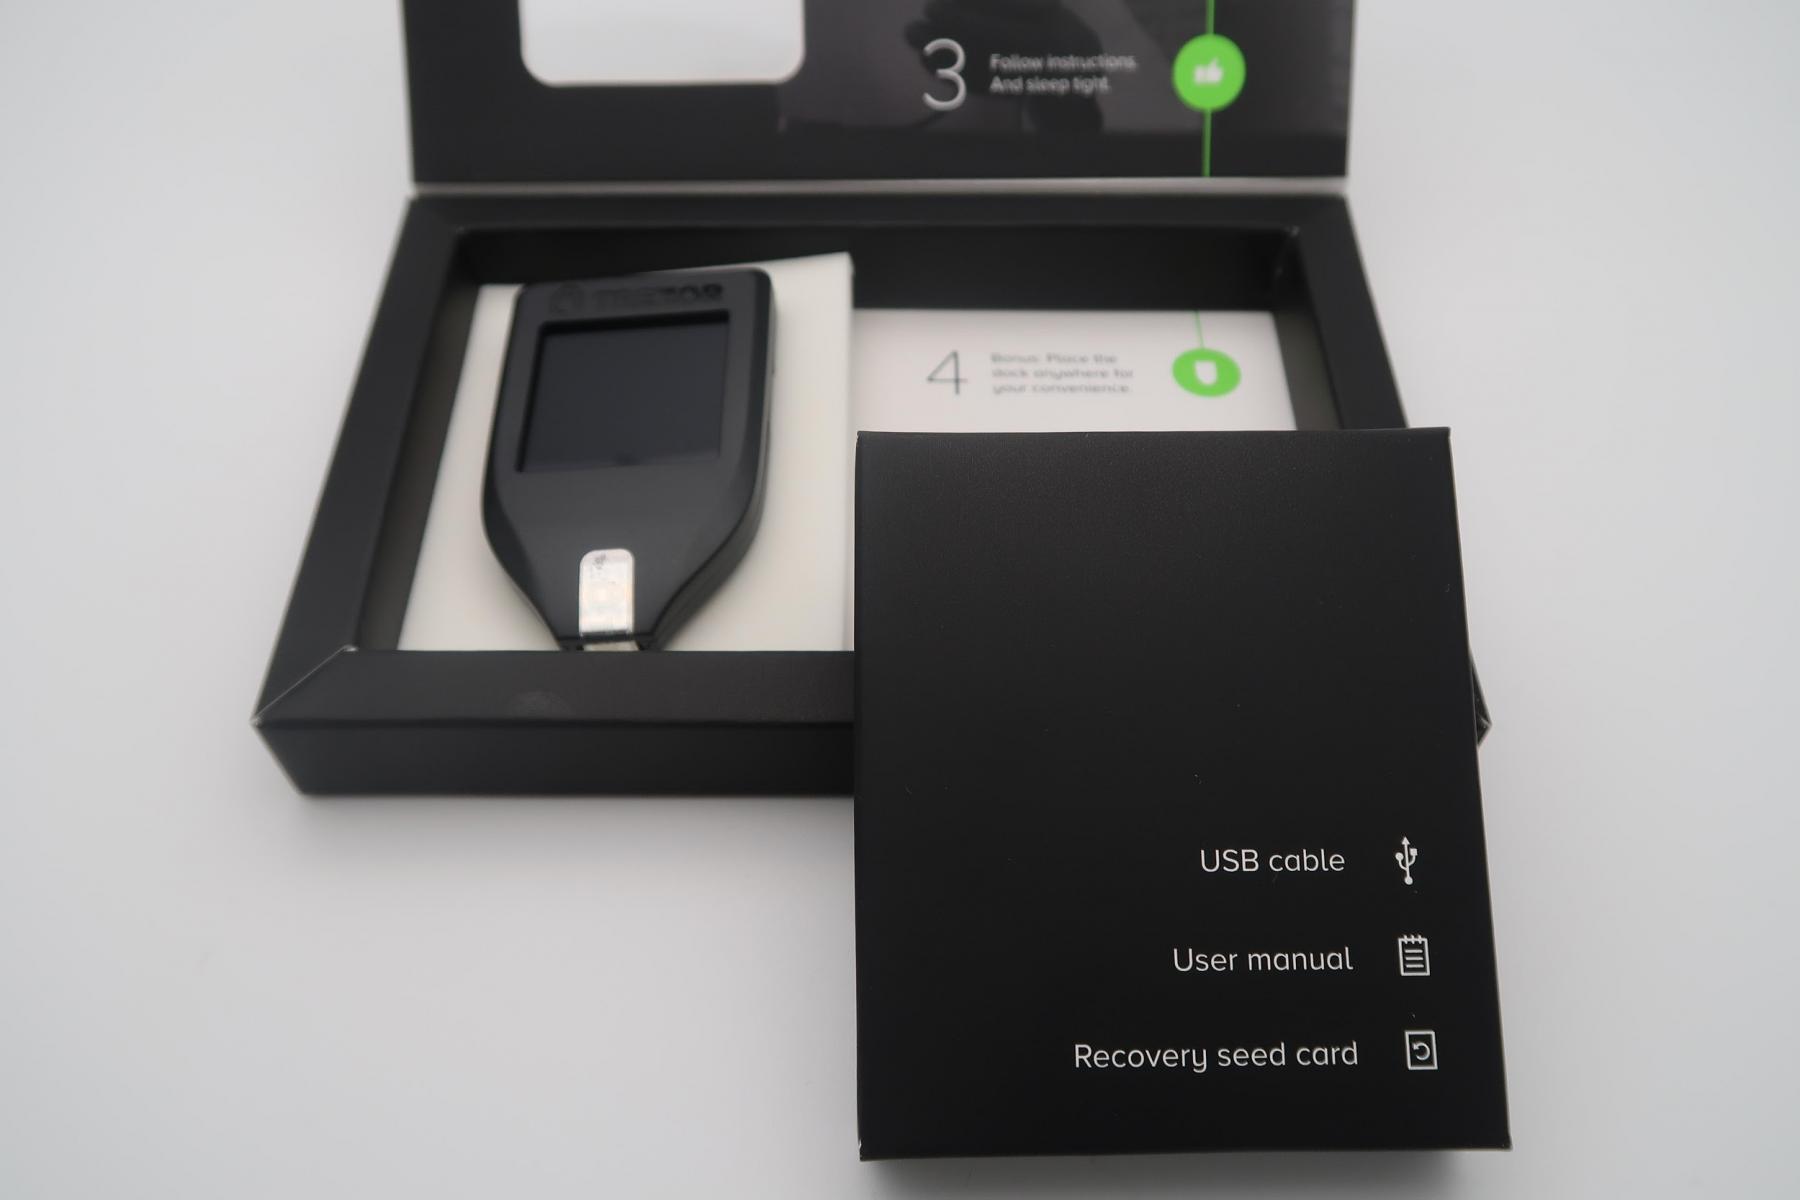 Unboxing of Trezor Model T crypto wallet